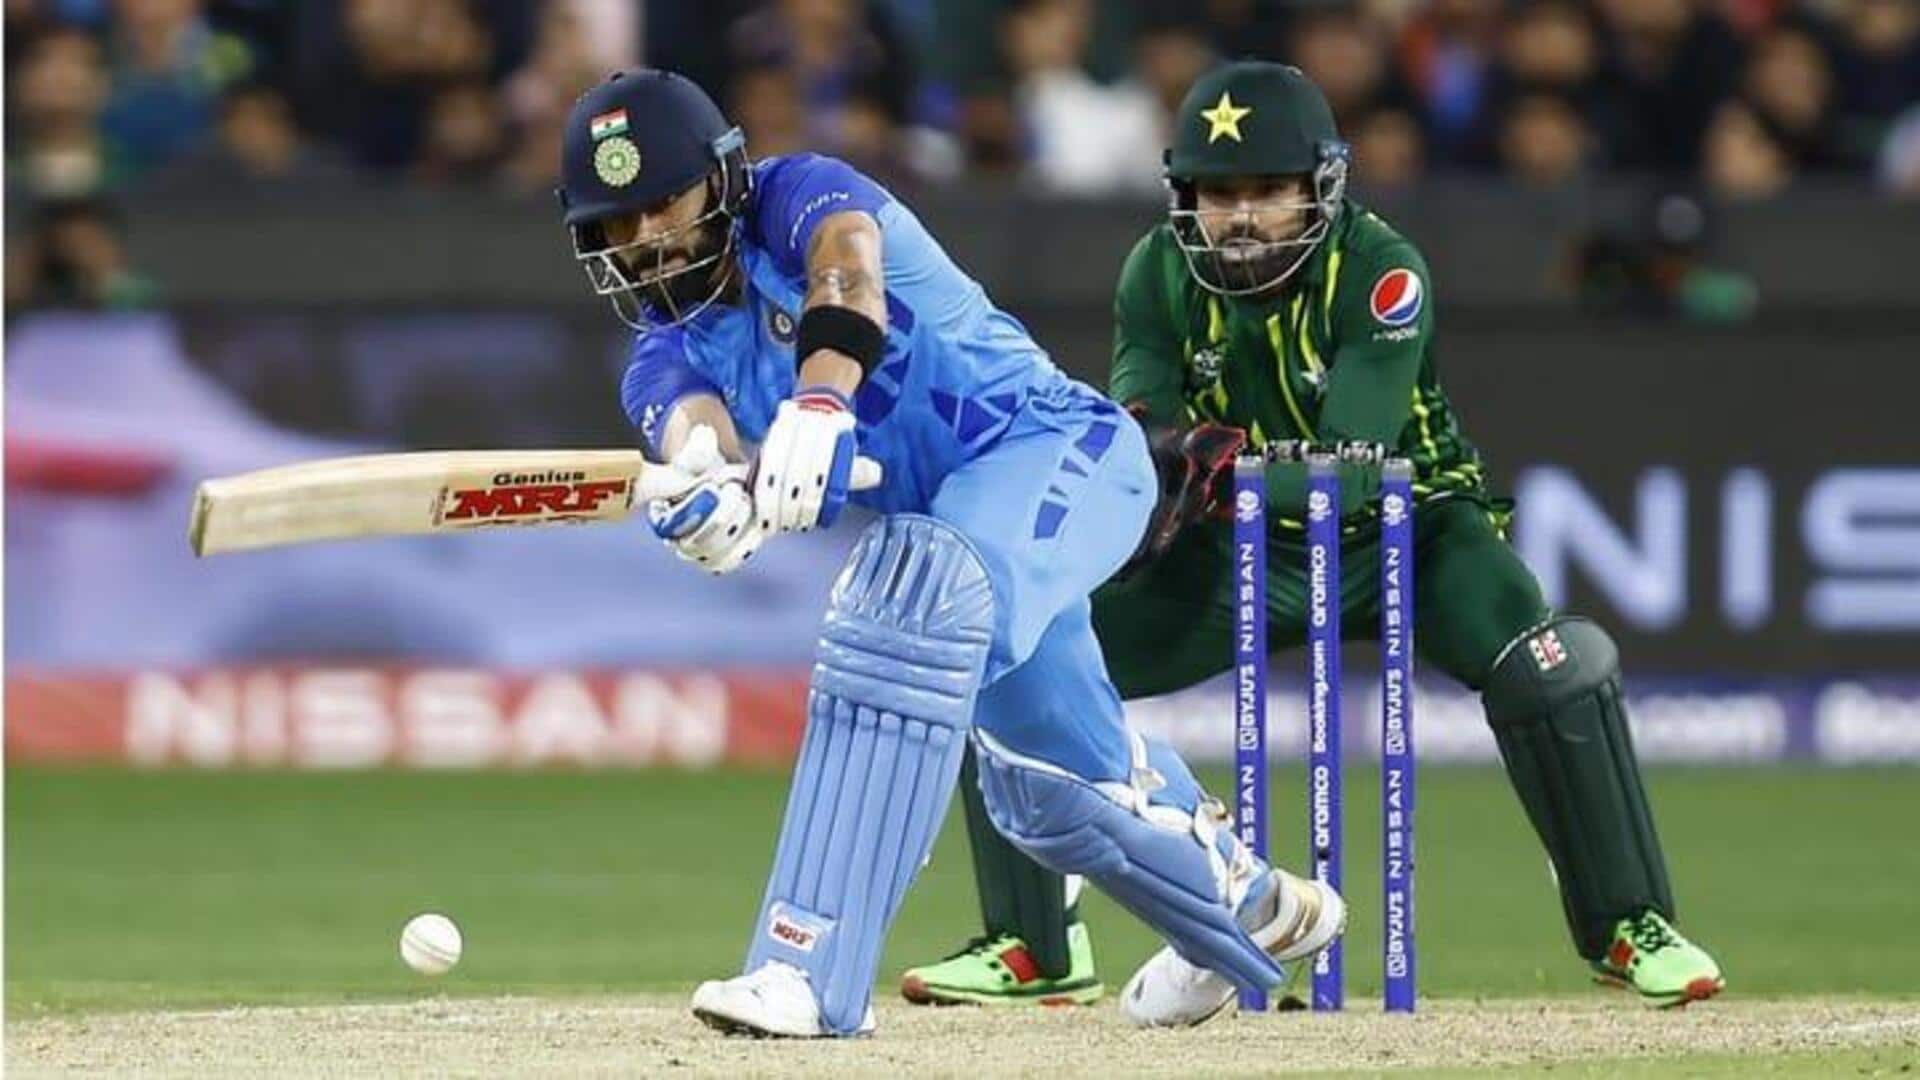 Will India vs Pakistan match be interrupted by rain? Details